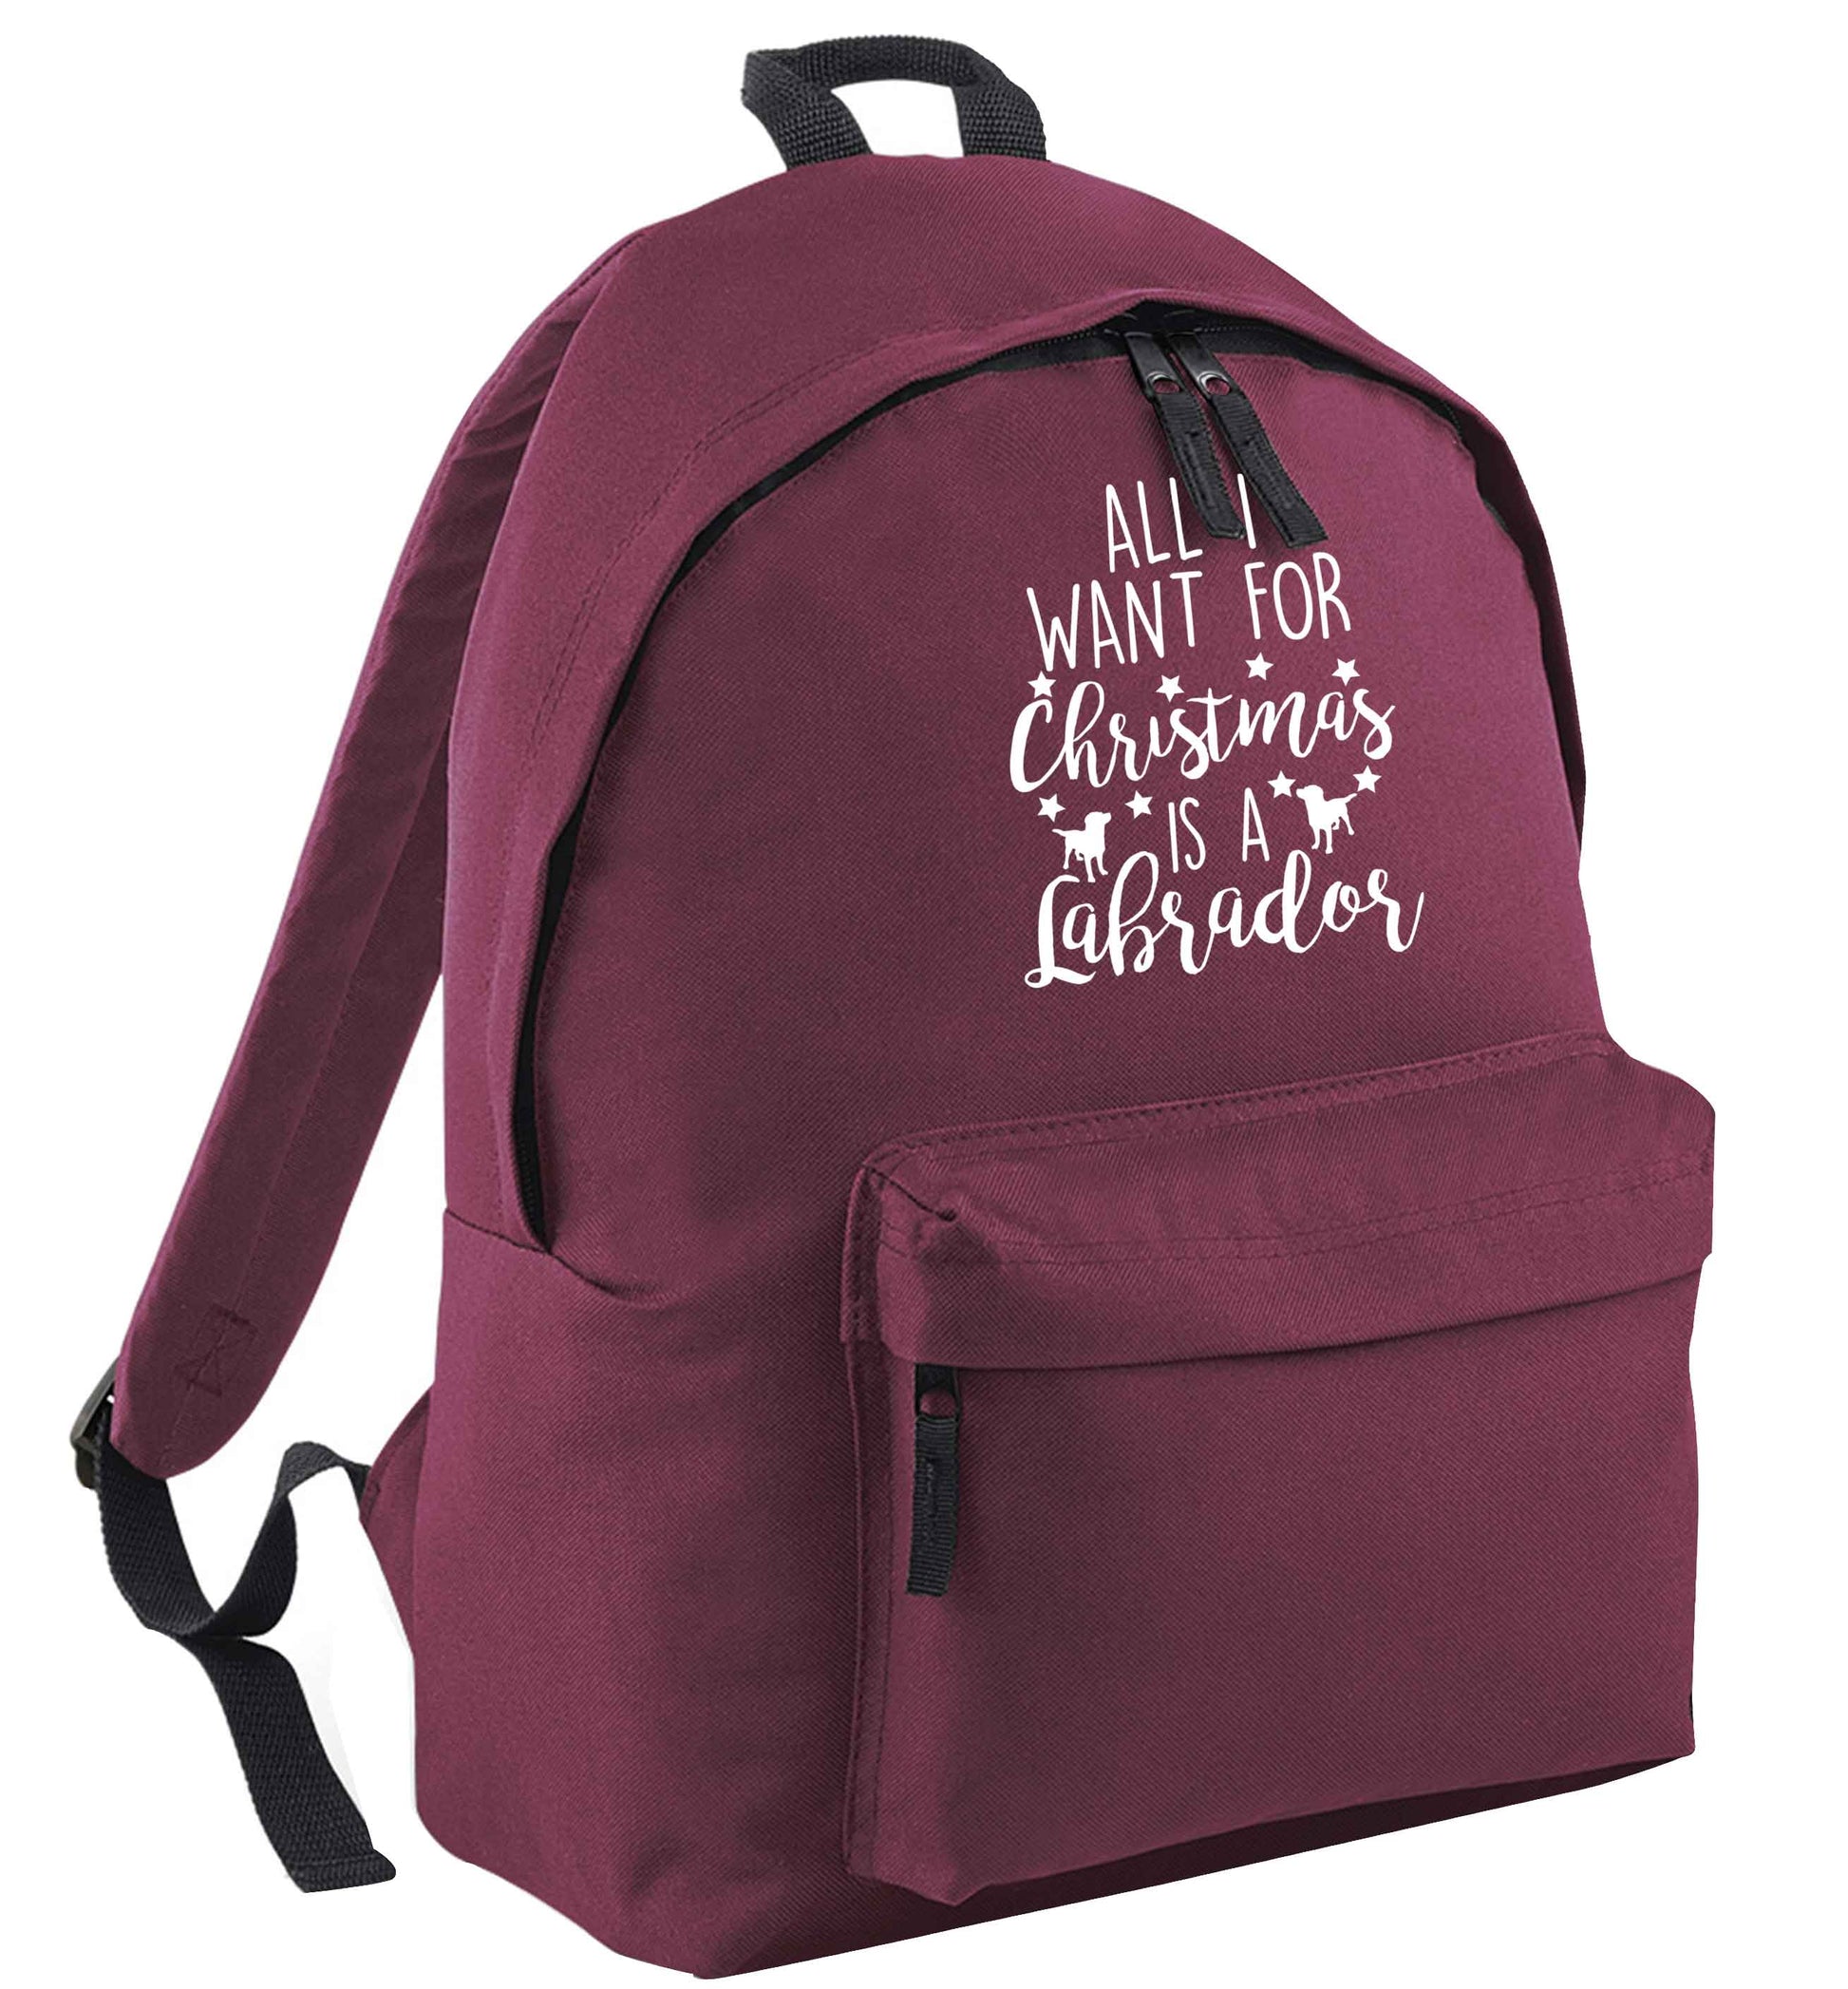 All I want for Christmas is a labrador maroon adults backpack